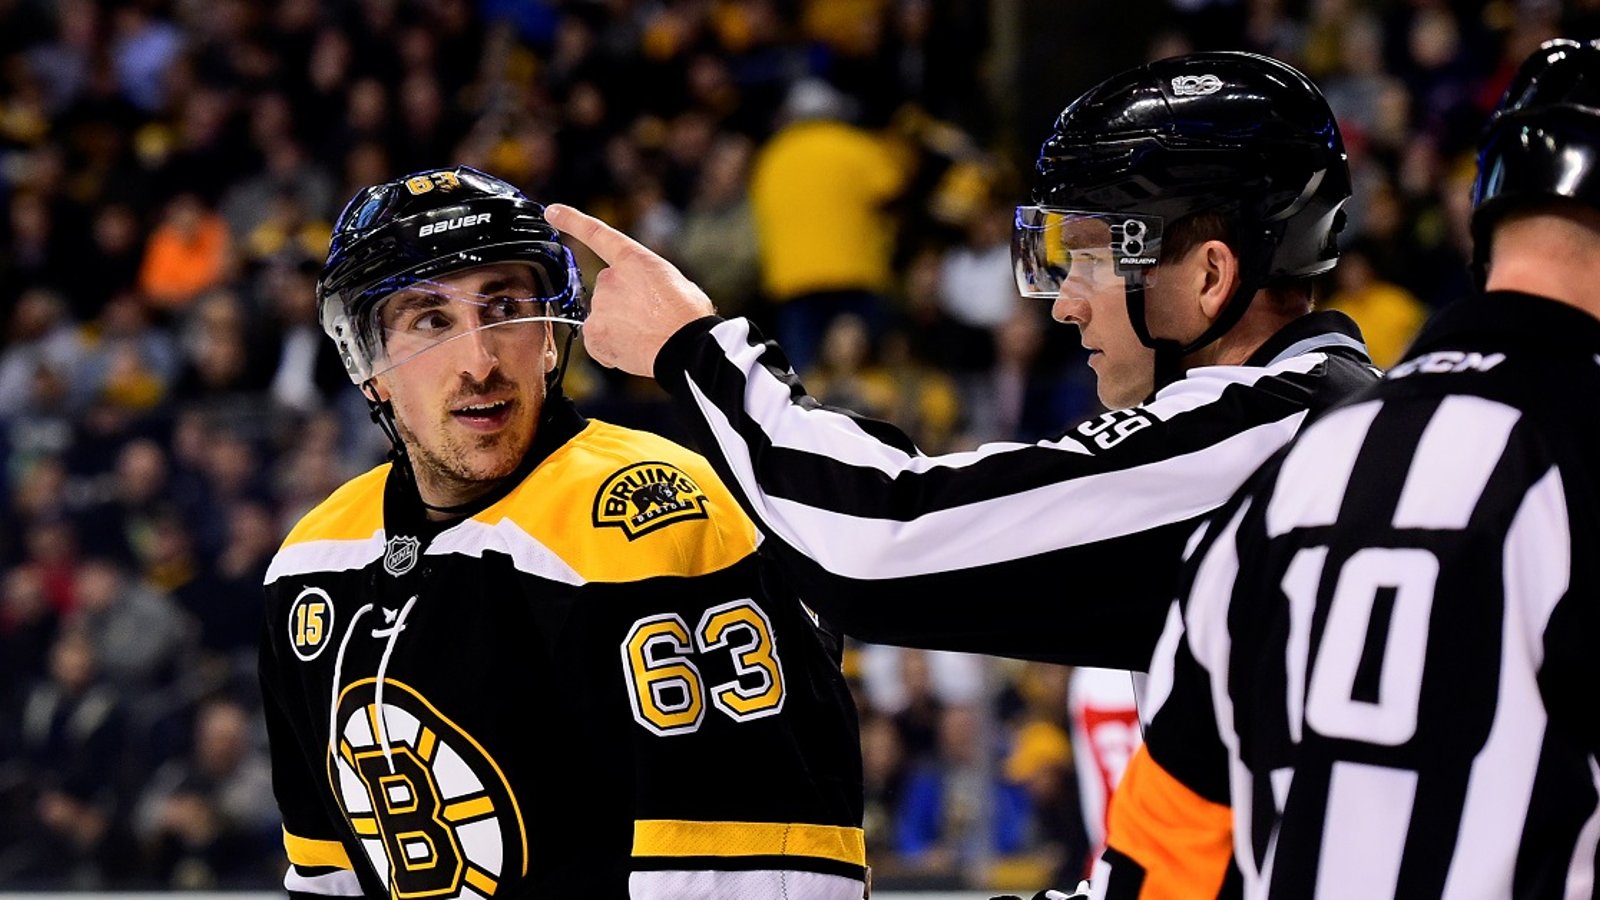 Brad Marchand to avoid discipline after yet another trip from behind.